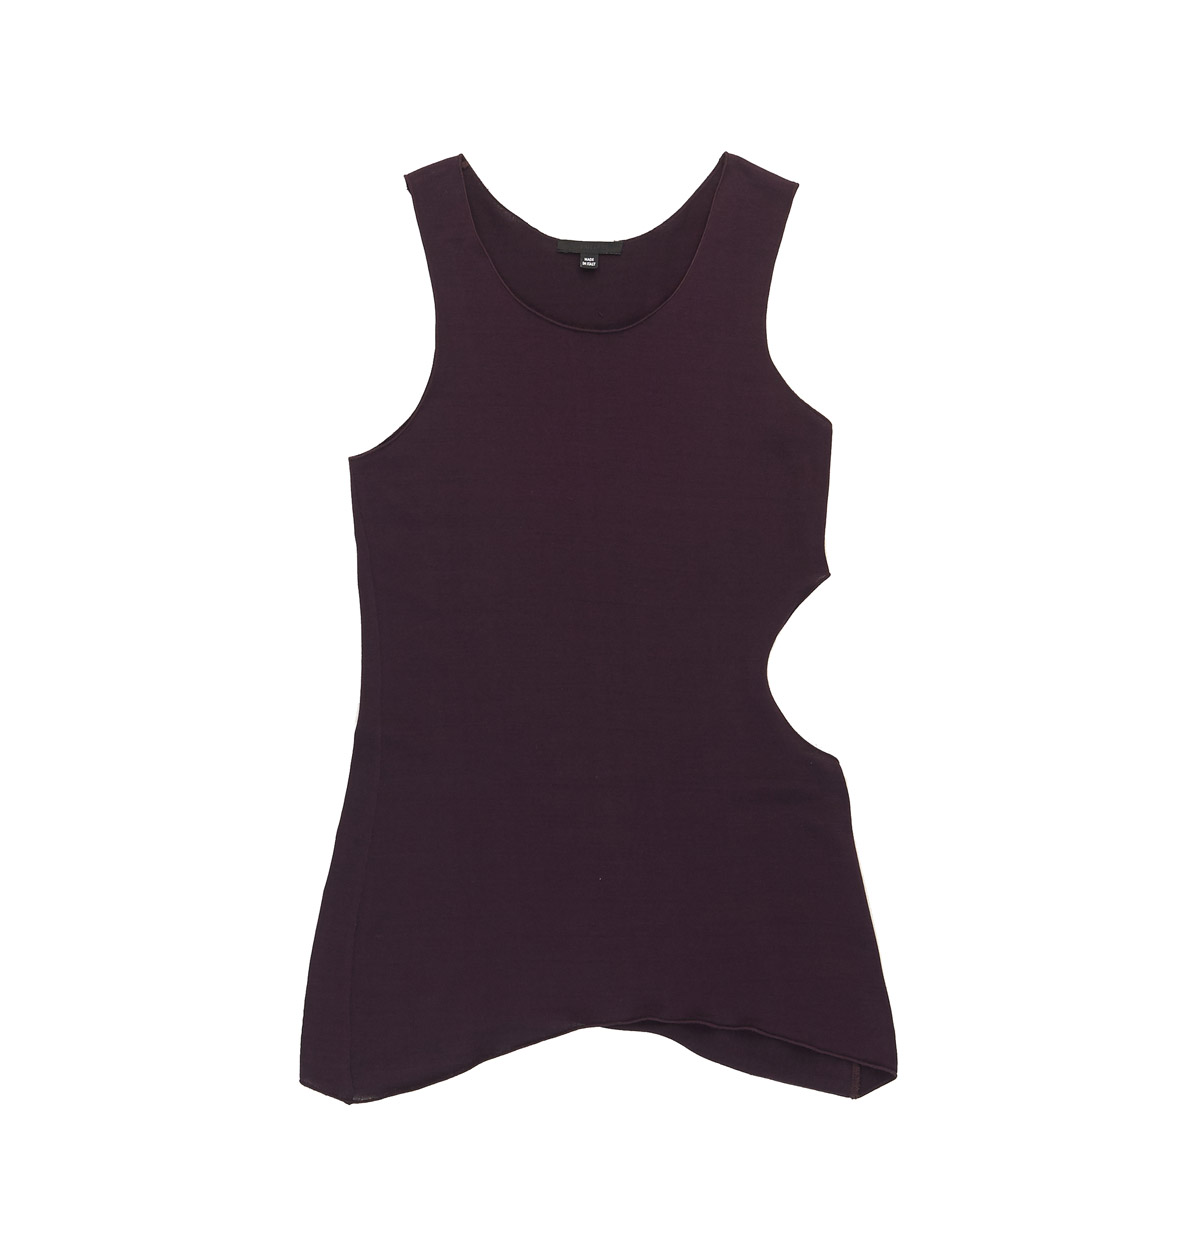 Tank top in fine mercerised cotton knit with side cut-out, Helmut Lang S/S 2004.